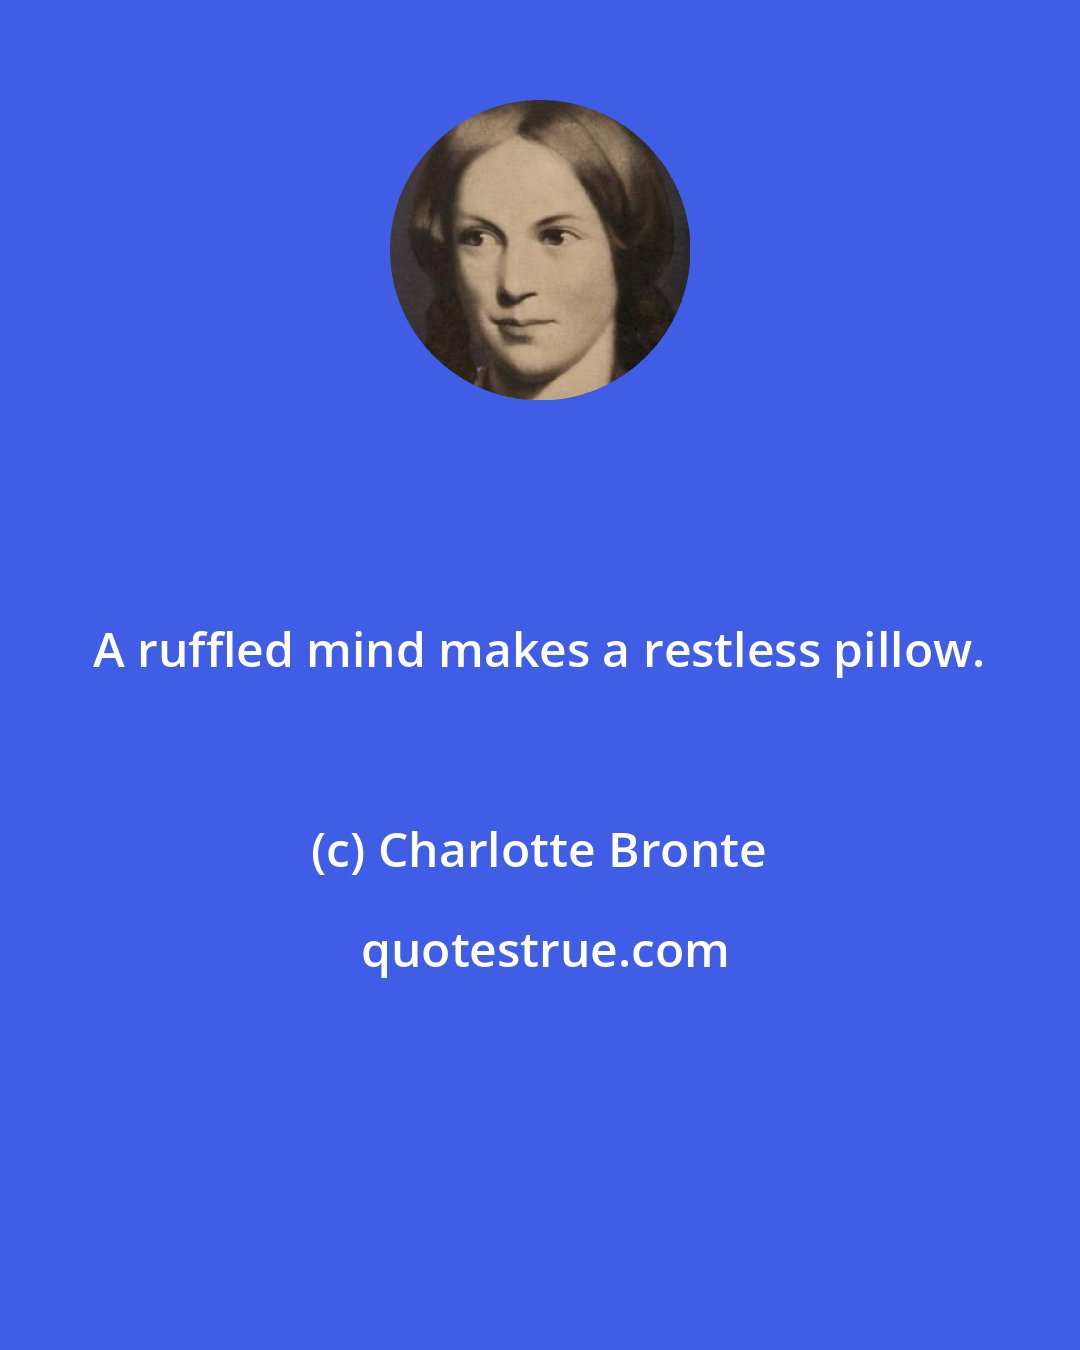 Charlotte Bronte: A ruffled mind makes a restless pillow.